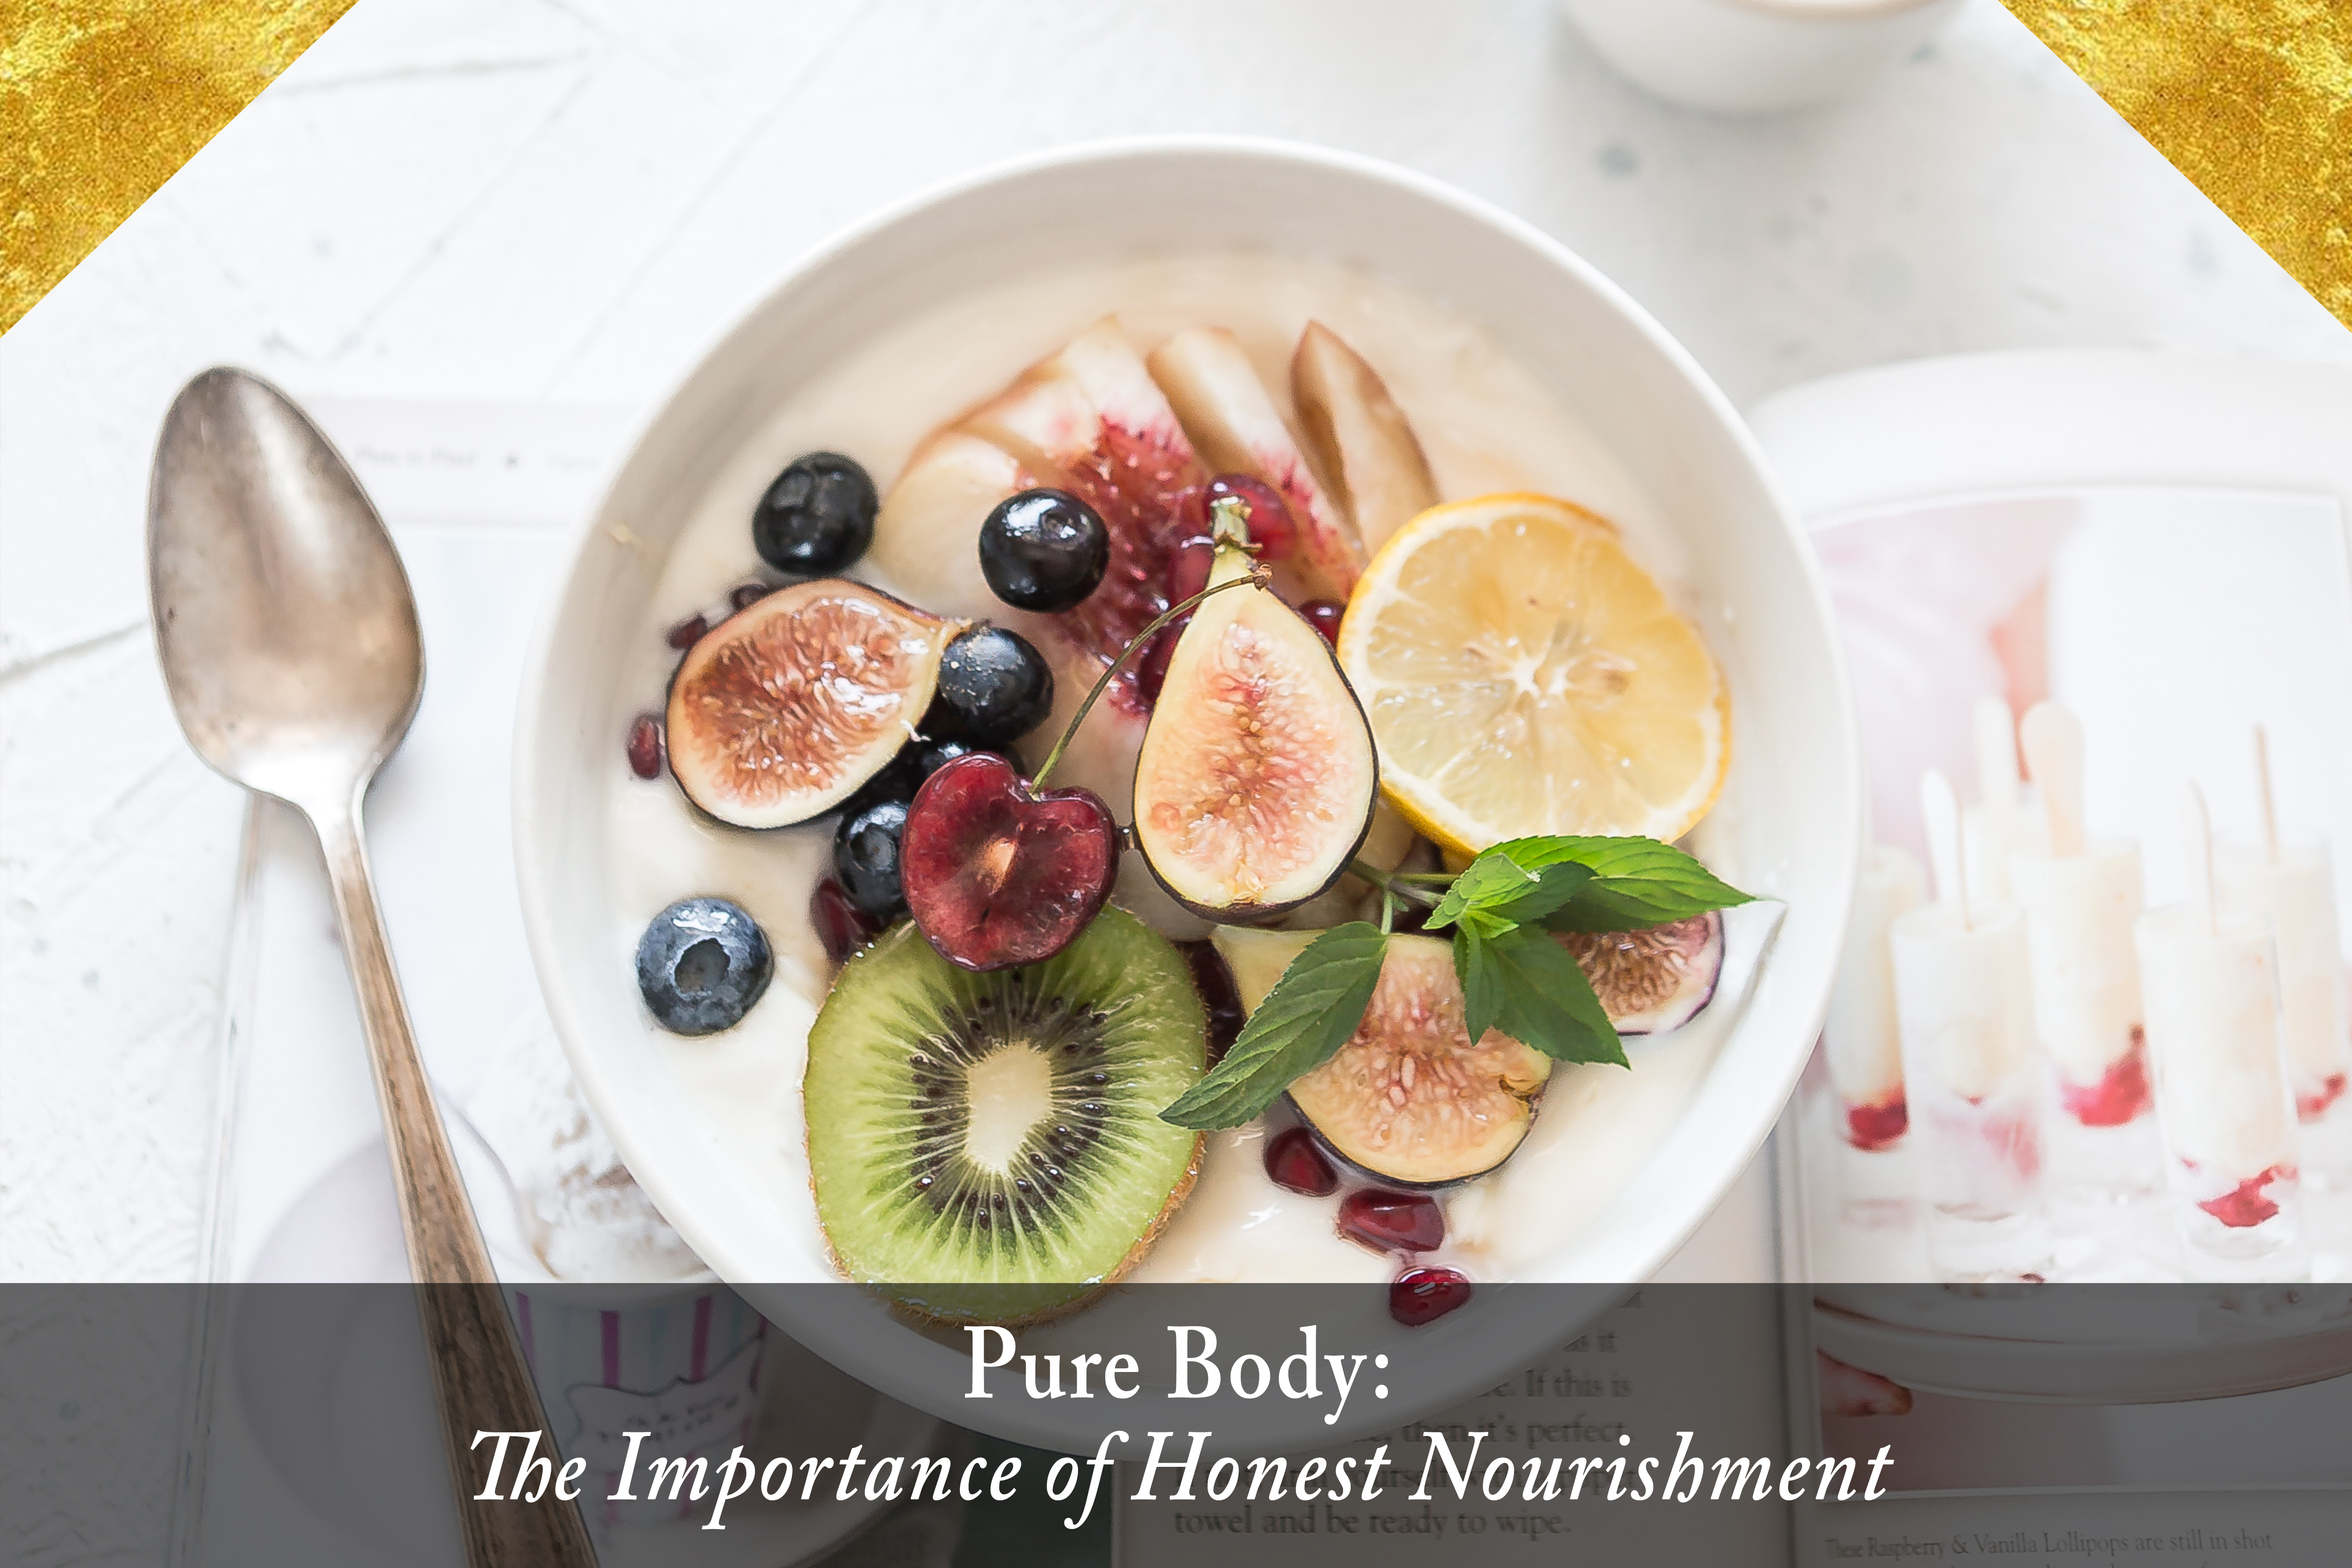 The Importance of Honest Nutrition